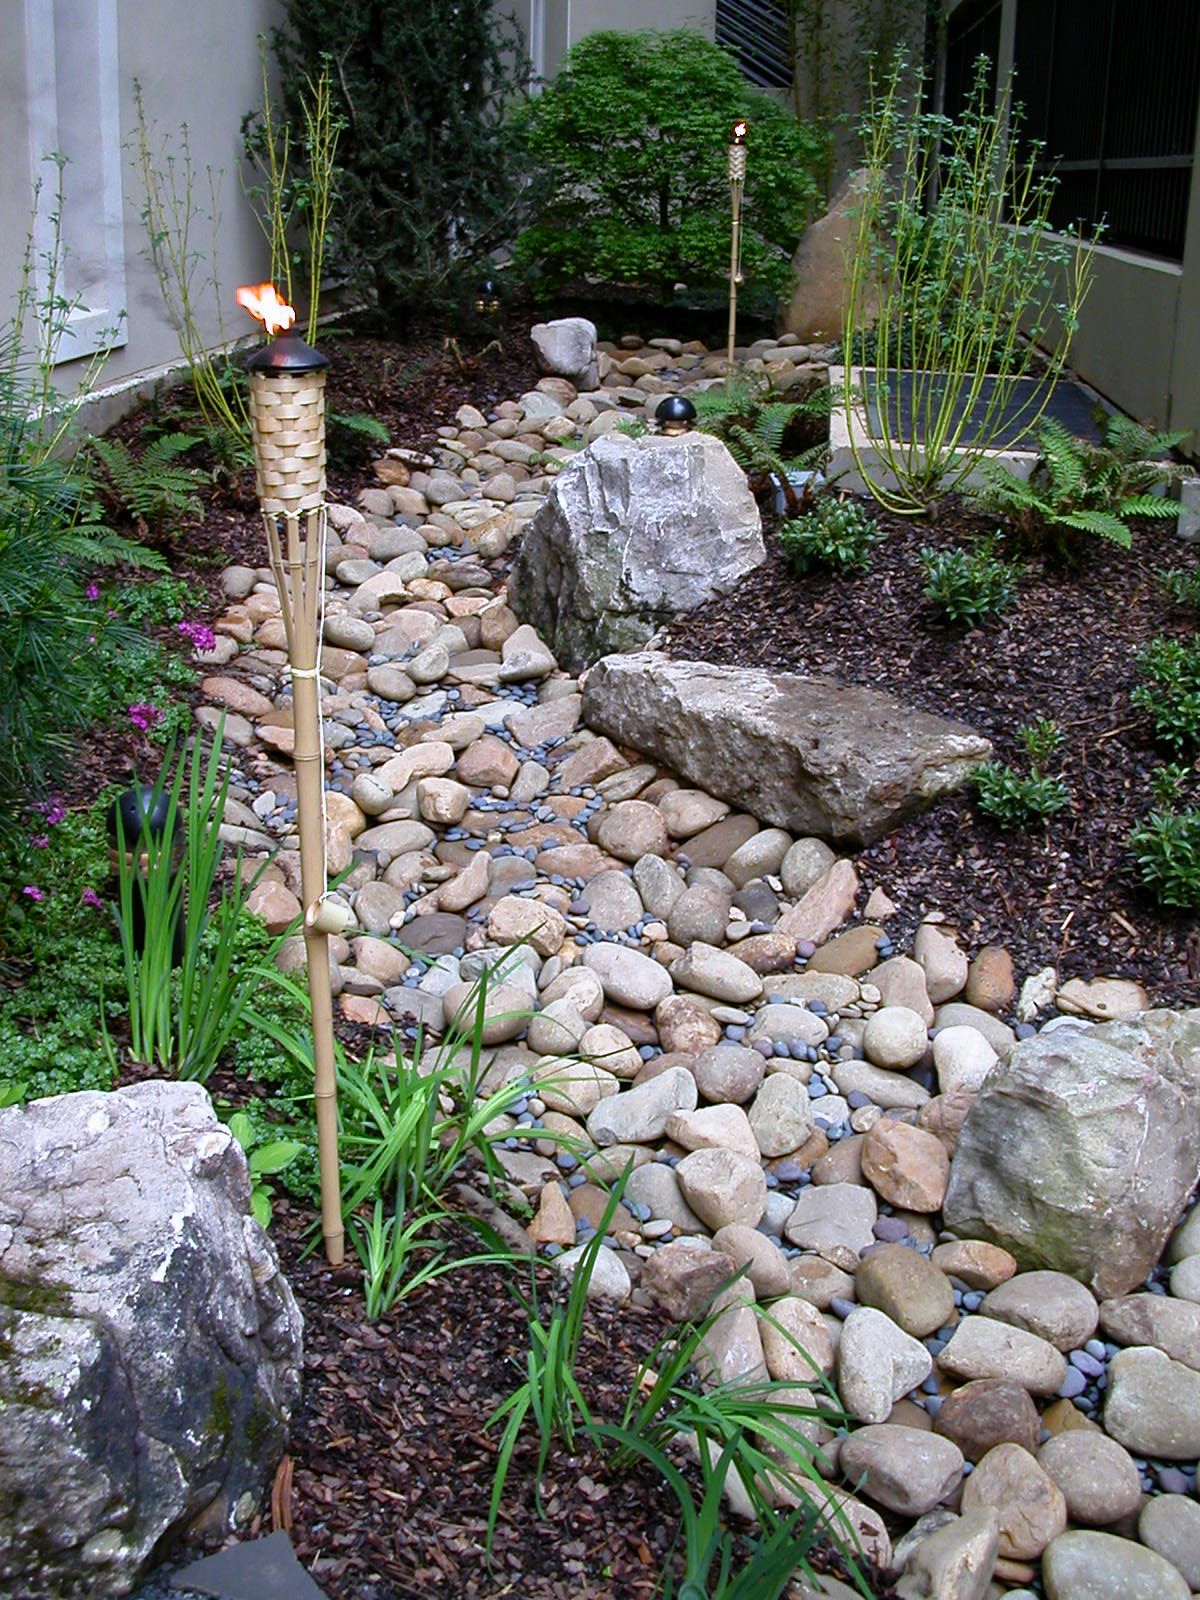 25 Gorgeous Dry Creek Bed Design Ideas | Drainage ditch, Stream bed ...